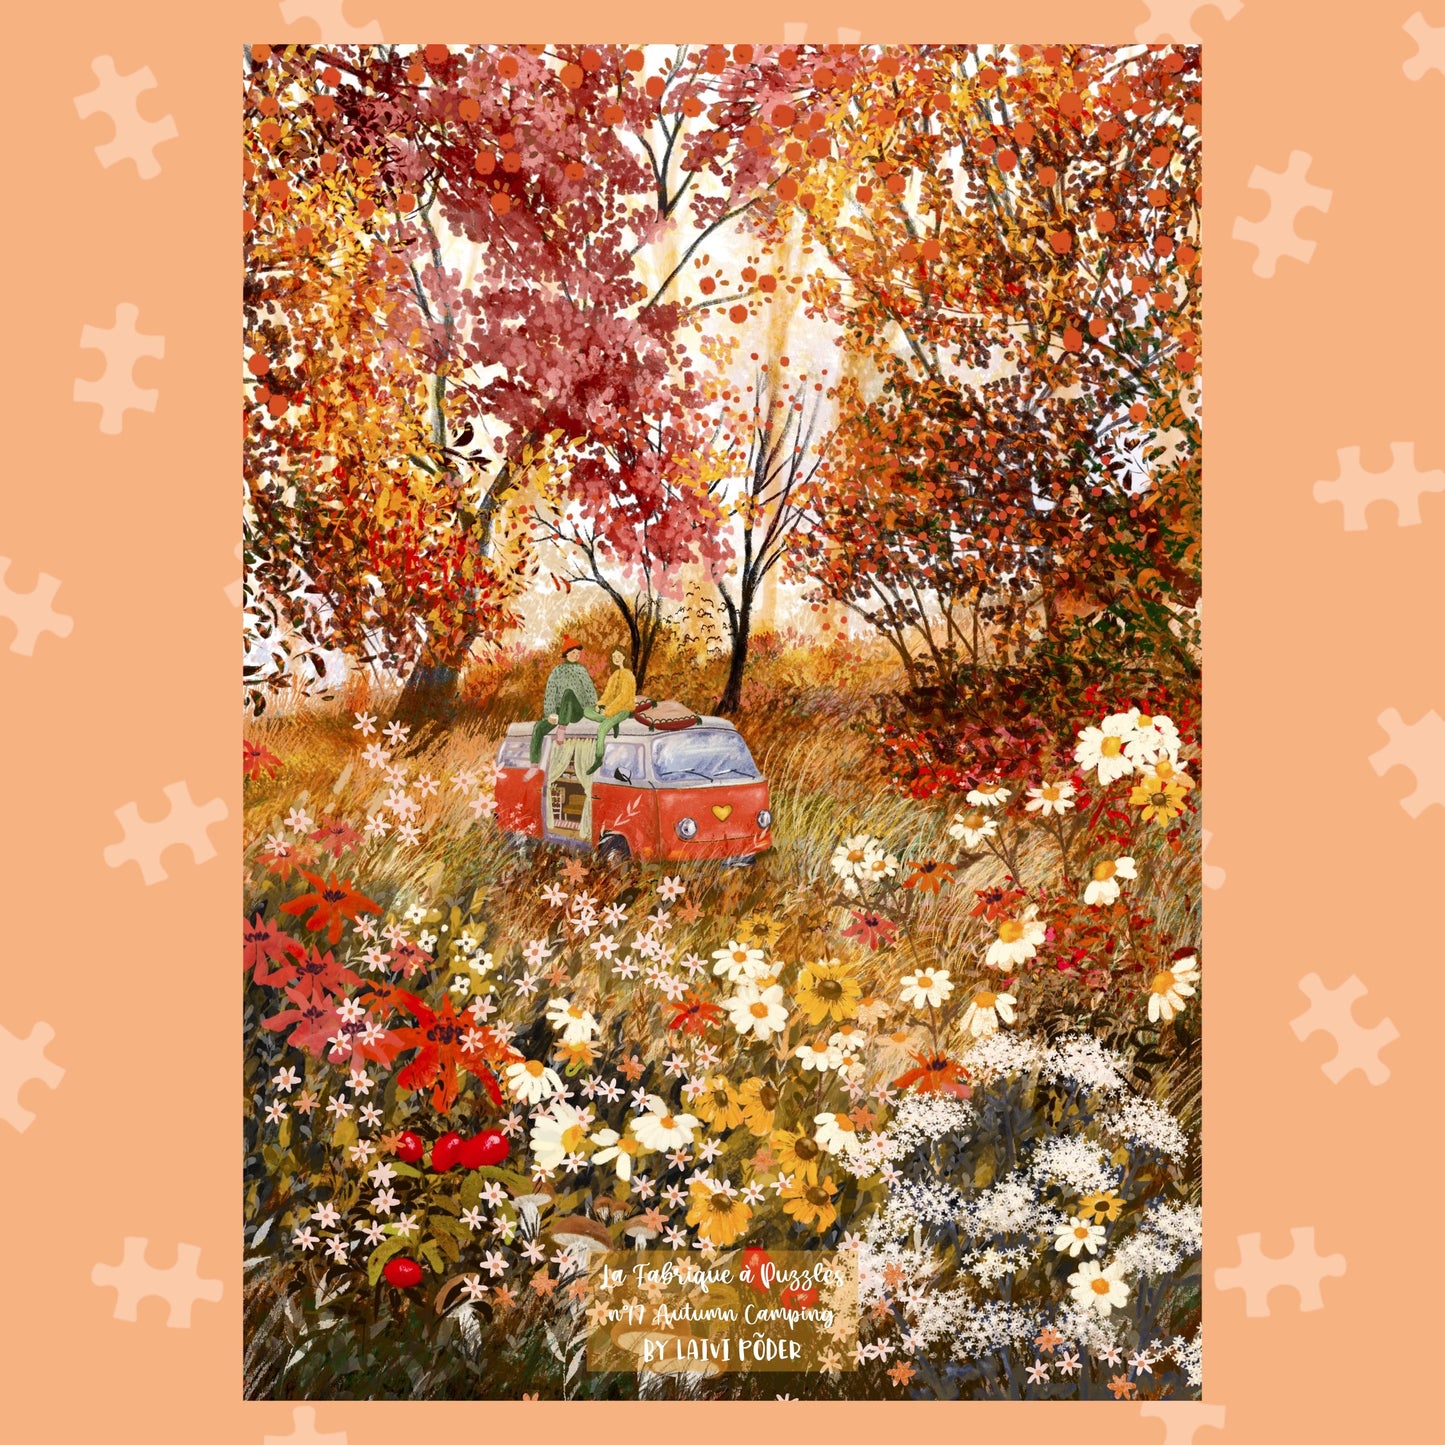 Puzzle n#17 "Autumn Camping" 500 pieces by Laivi Põder